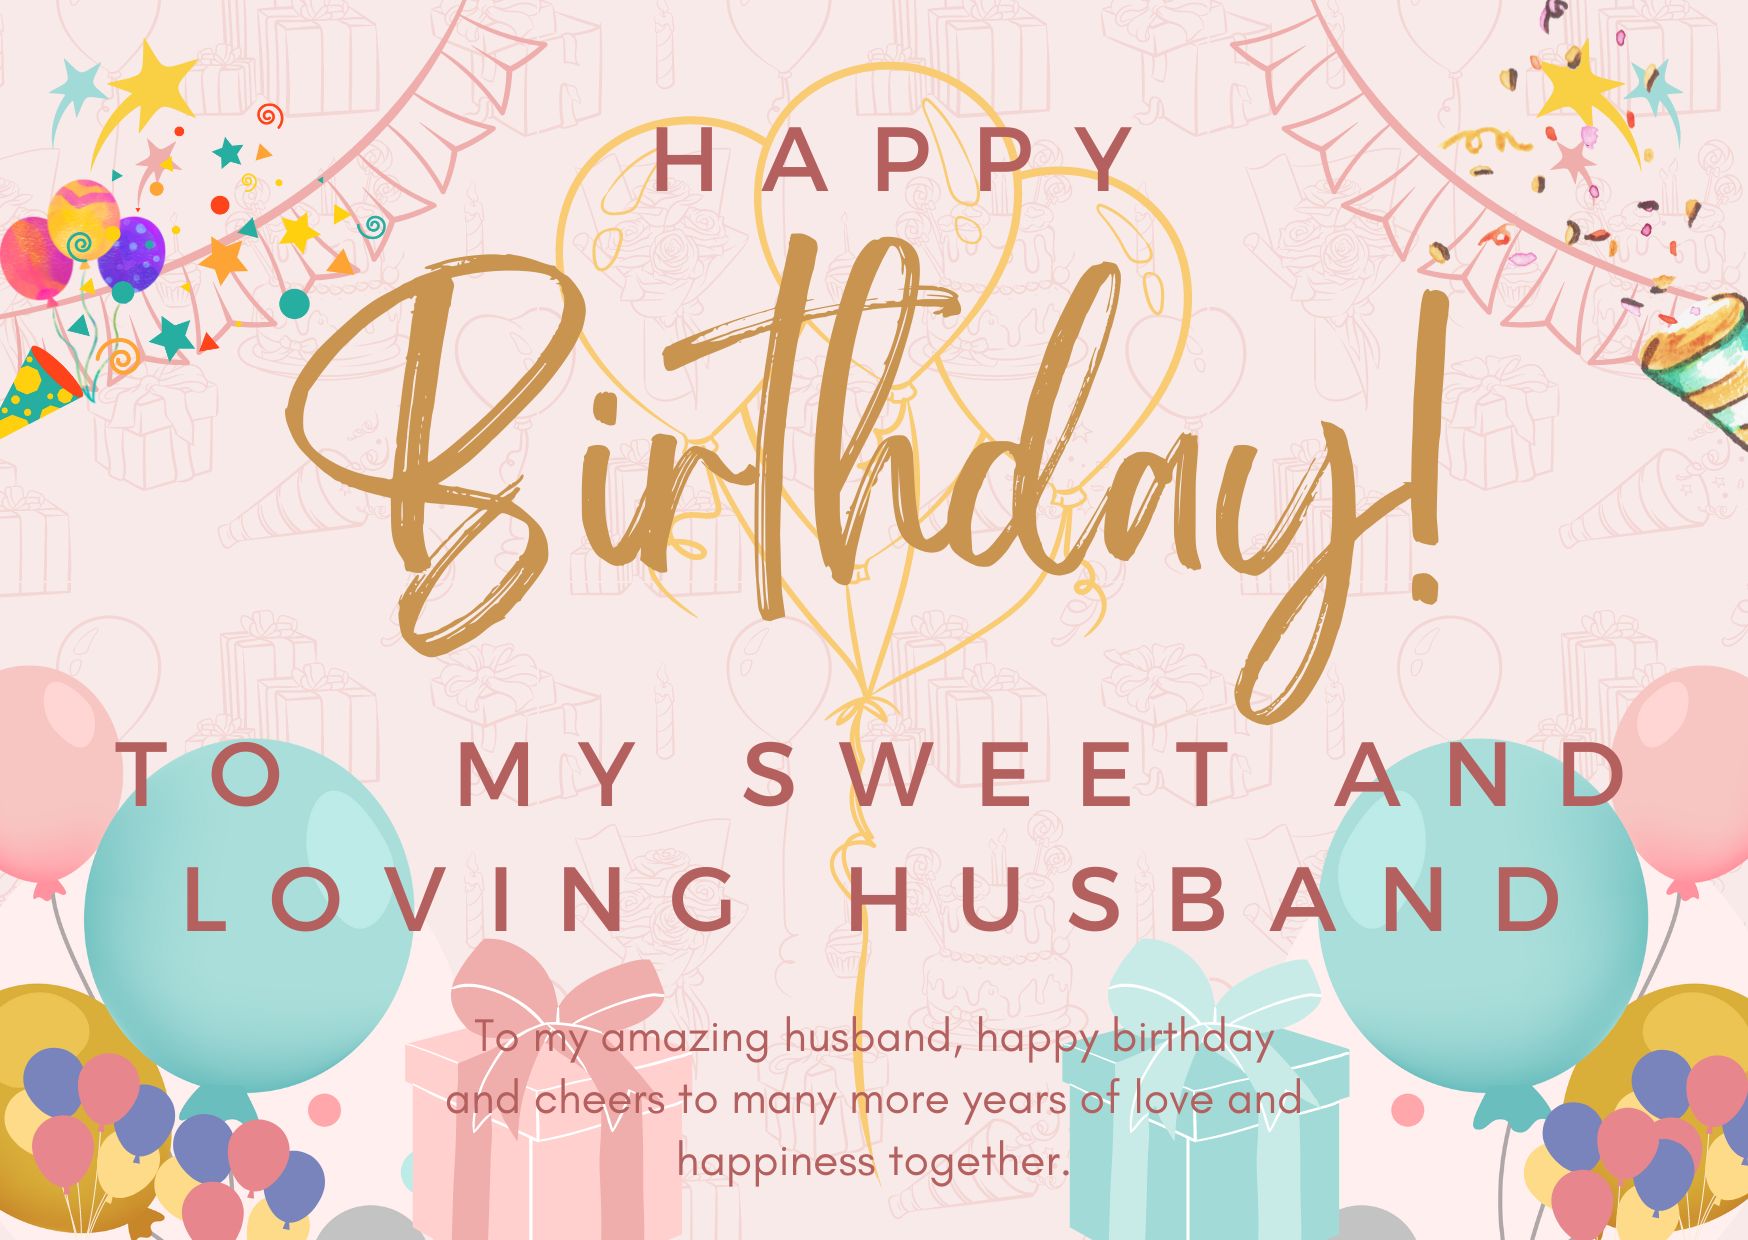 Happy Birthday Wishes for Husband Romantic Blessing